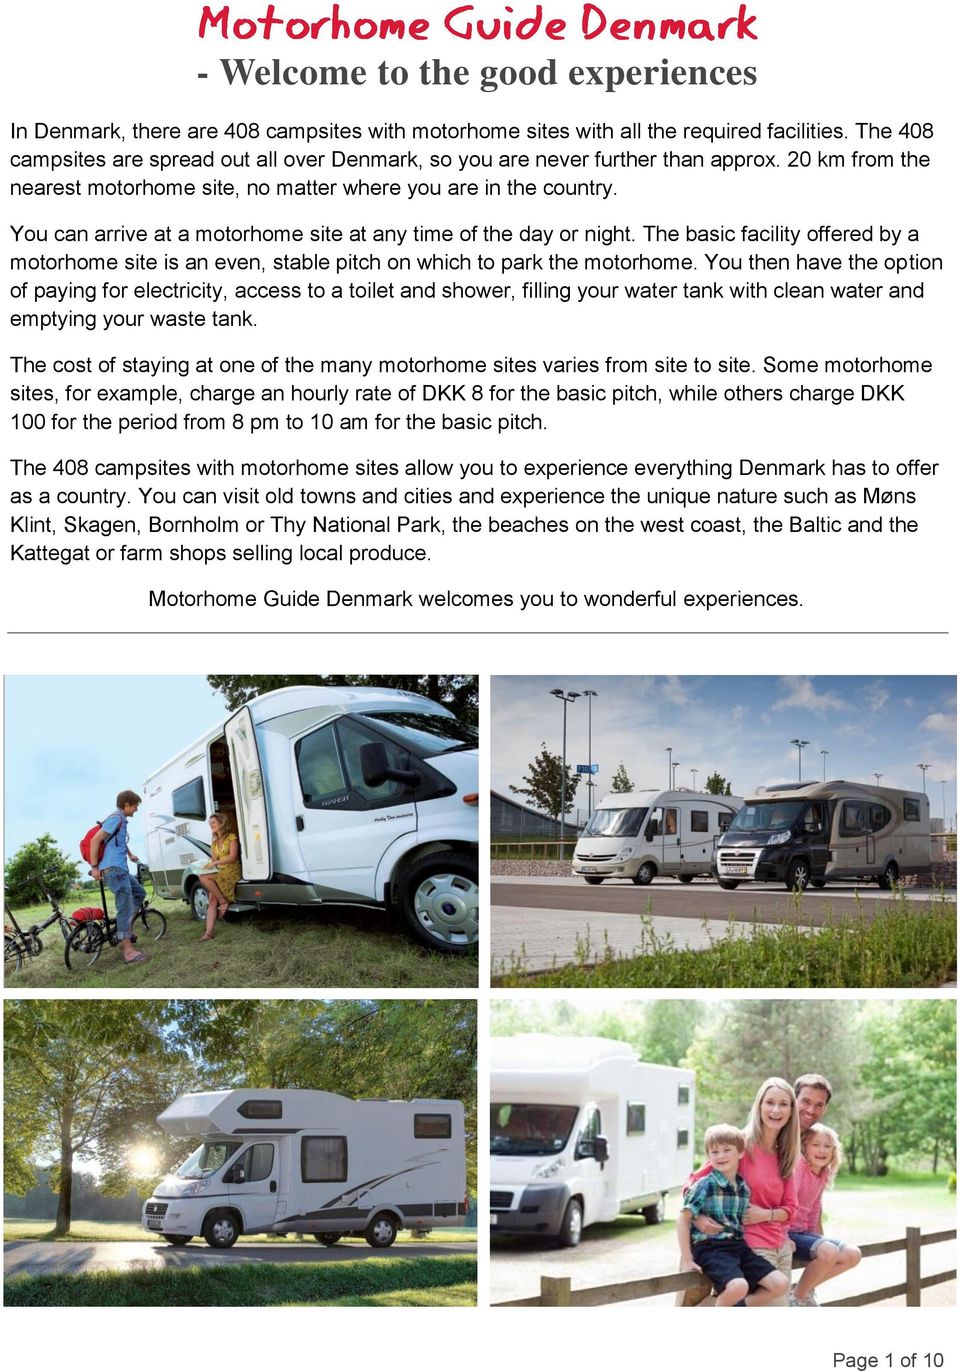 You can arrive at a motorhome site at any time of the day or night. The basic facility offered by a motorhome site is an even, stable pitch on which to park the motorhome.